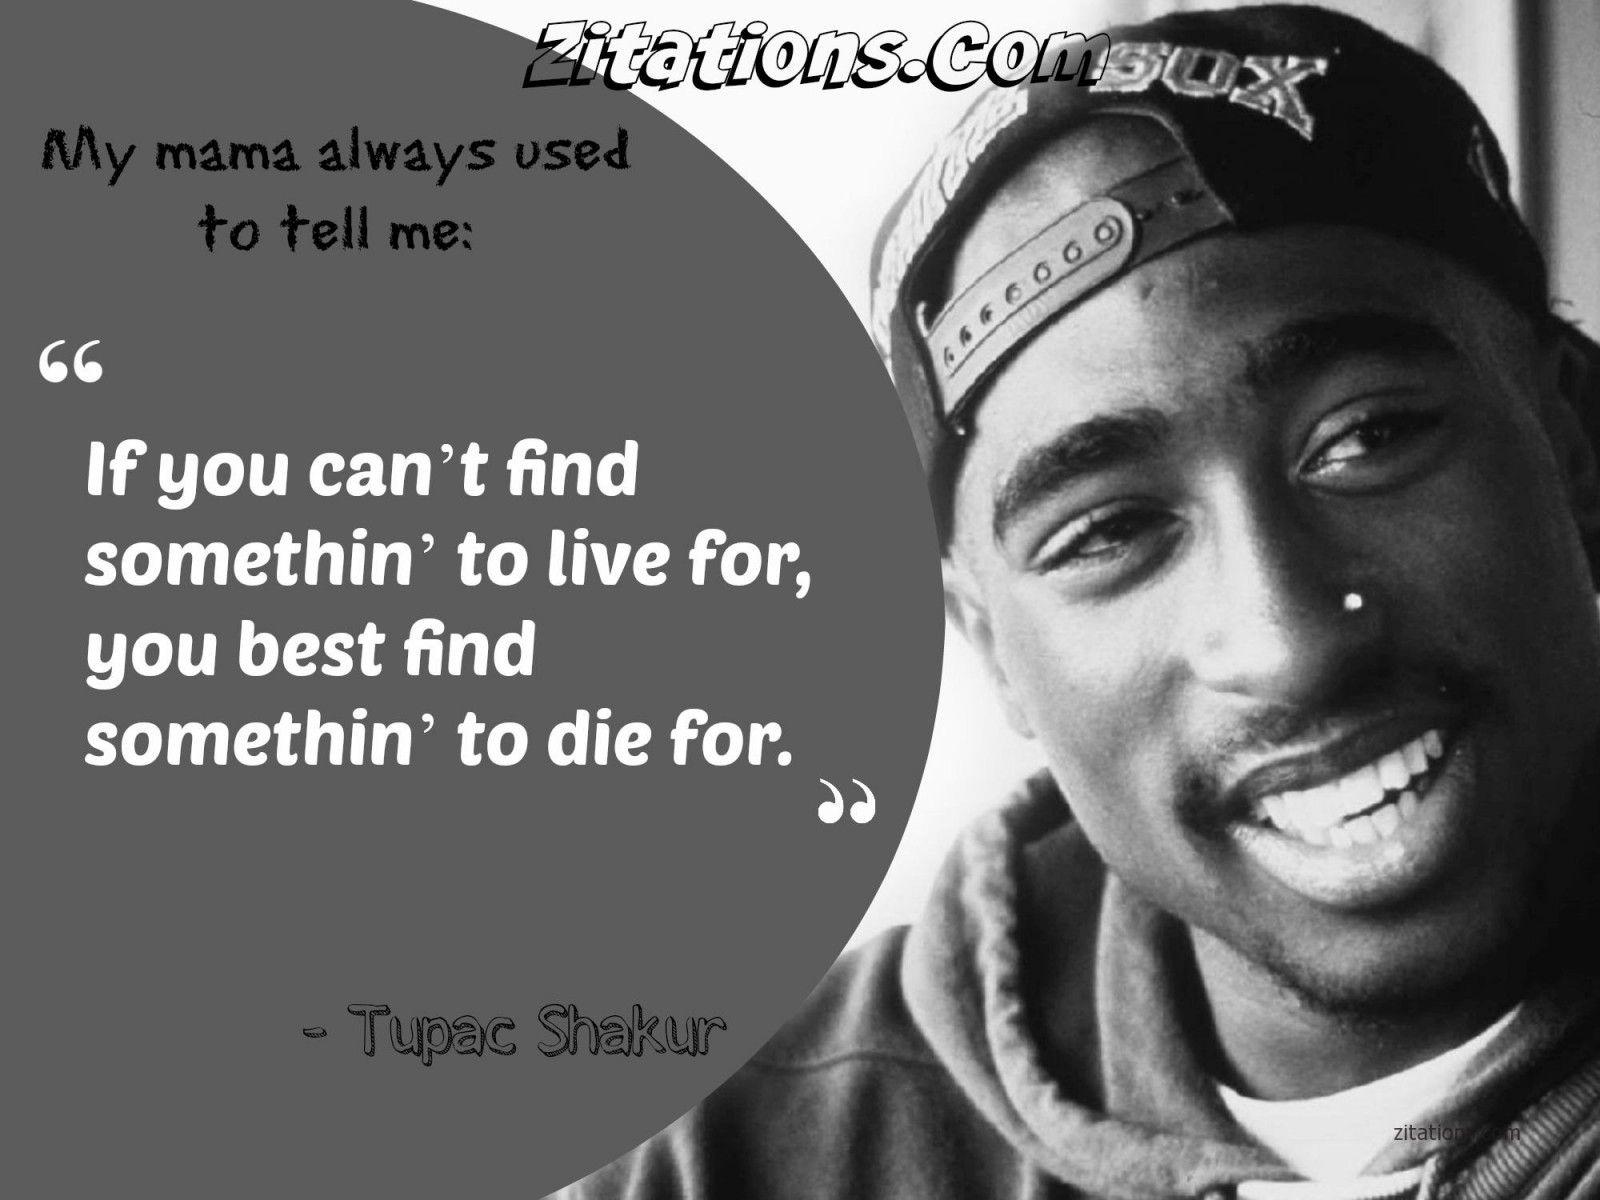 Inspirational Quotes by Musicians Awesome Best Tupac Quotes 2pac top